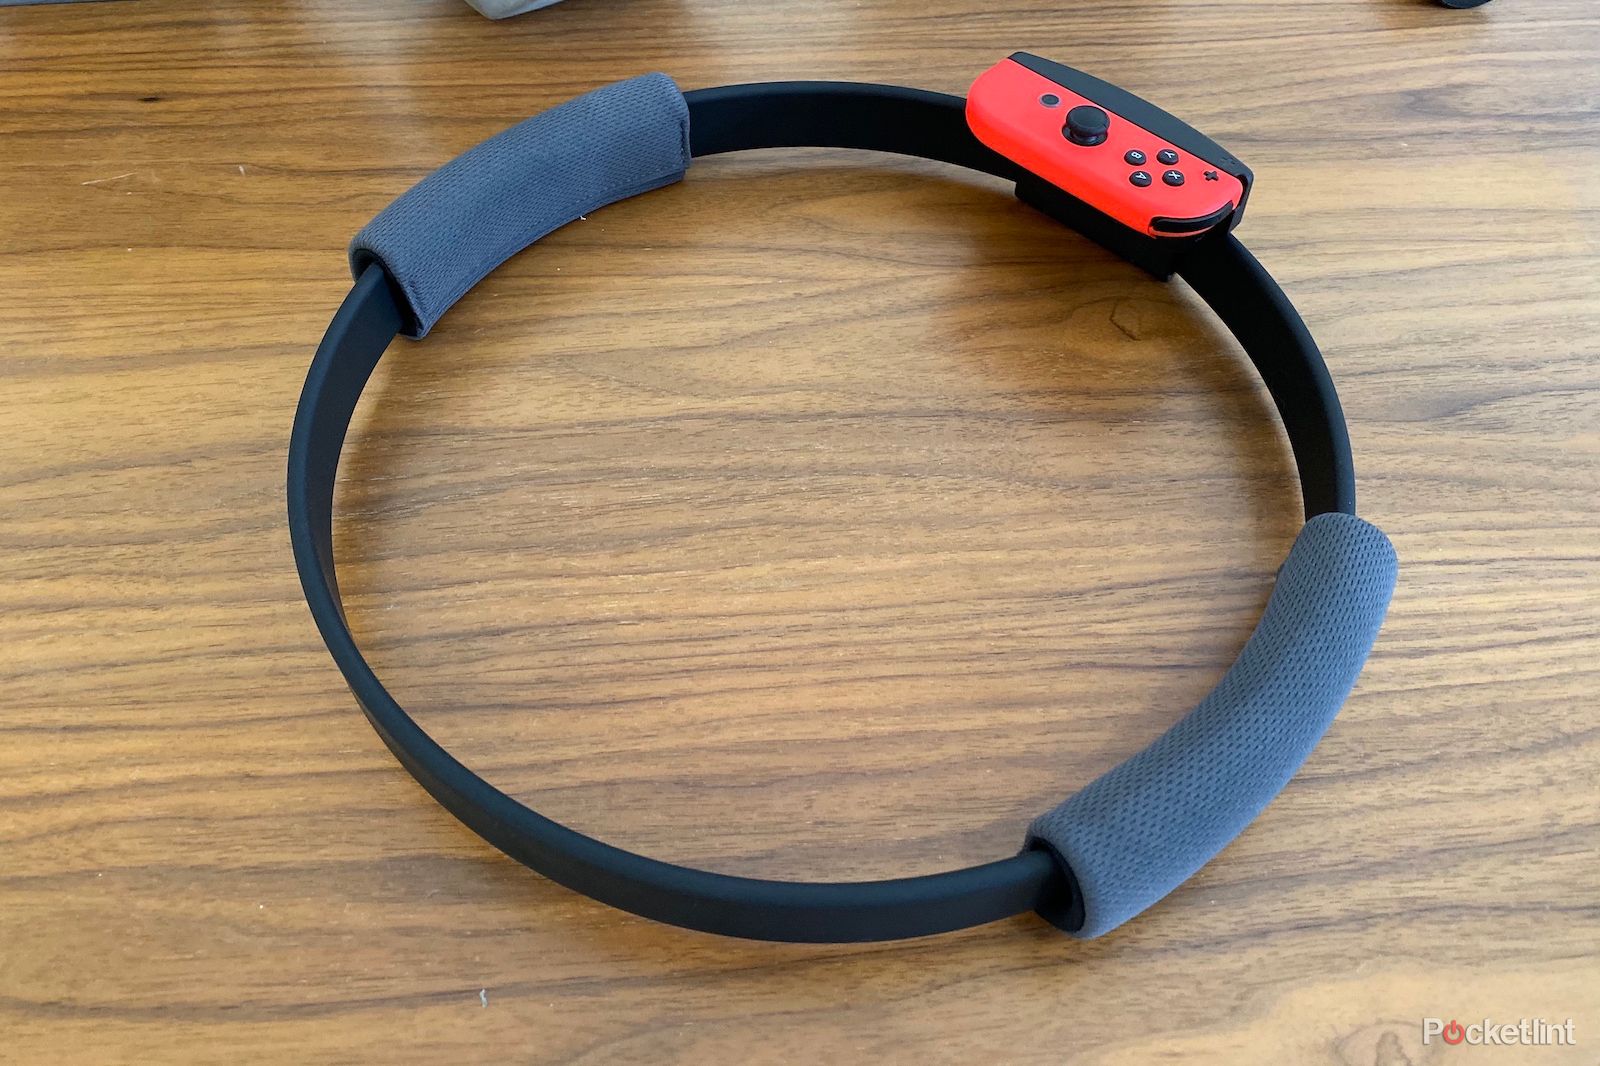 Ring Fit Adventure Review 